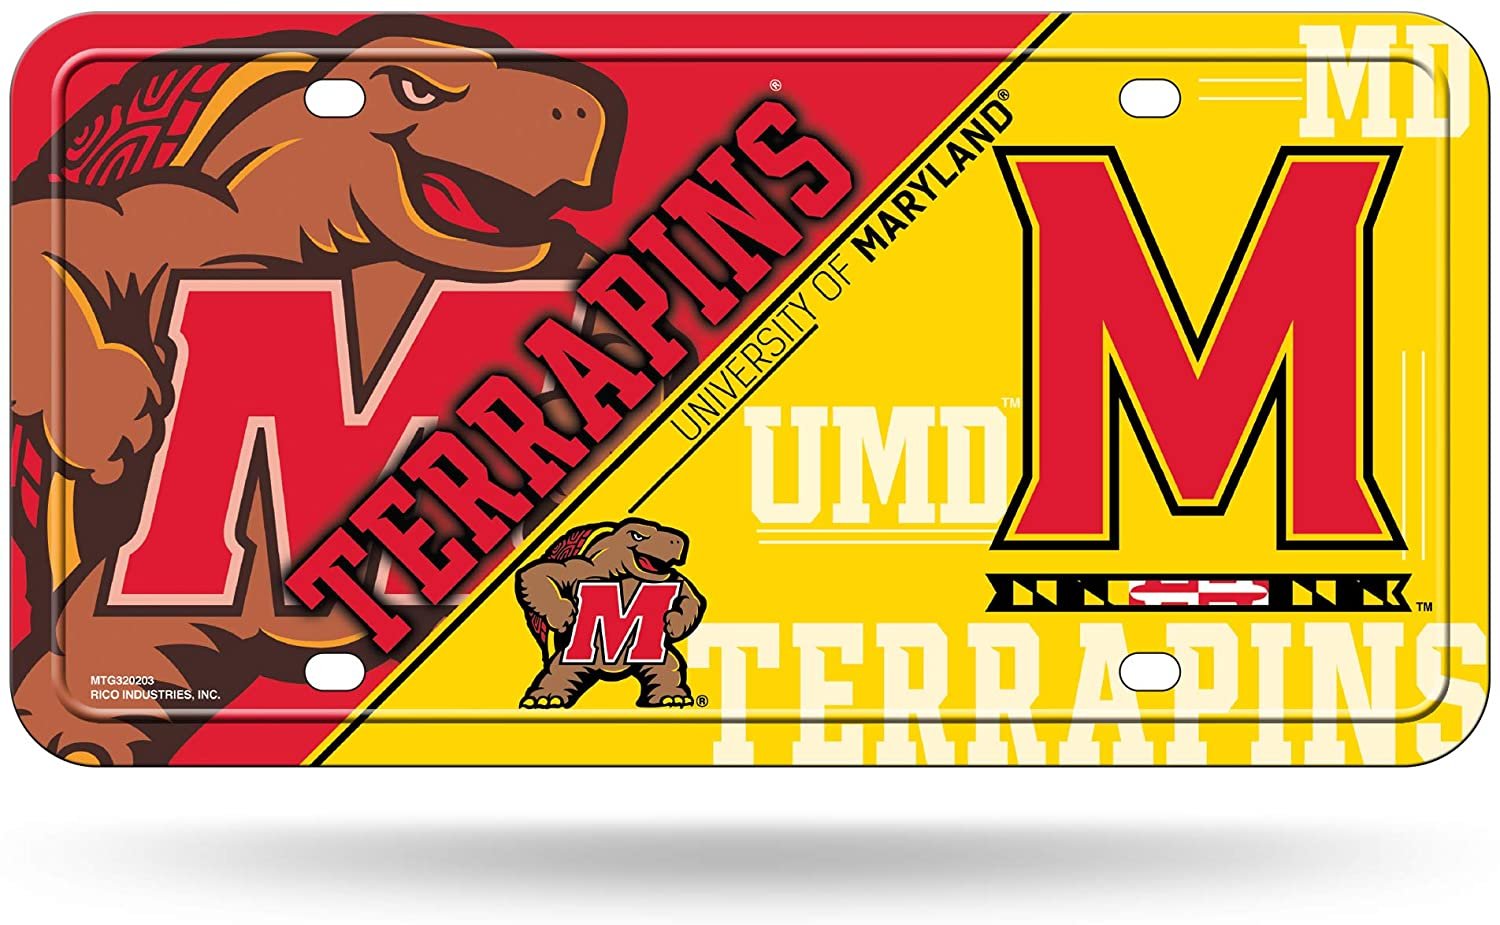 University of Maryland Terrapins Metal Auto Tag License Plate, Split Design, 6x12 Inch